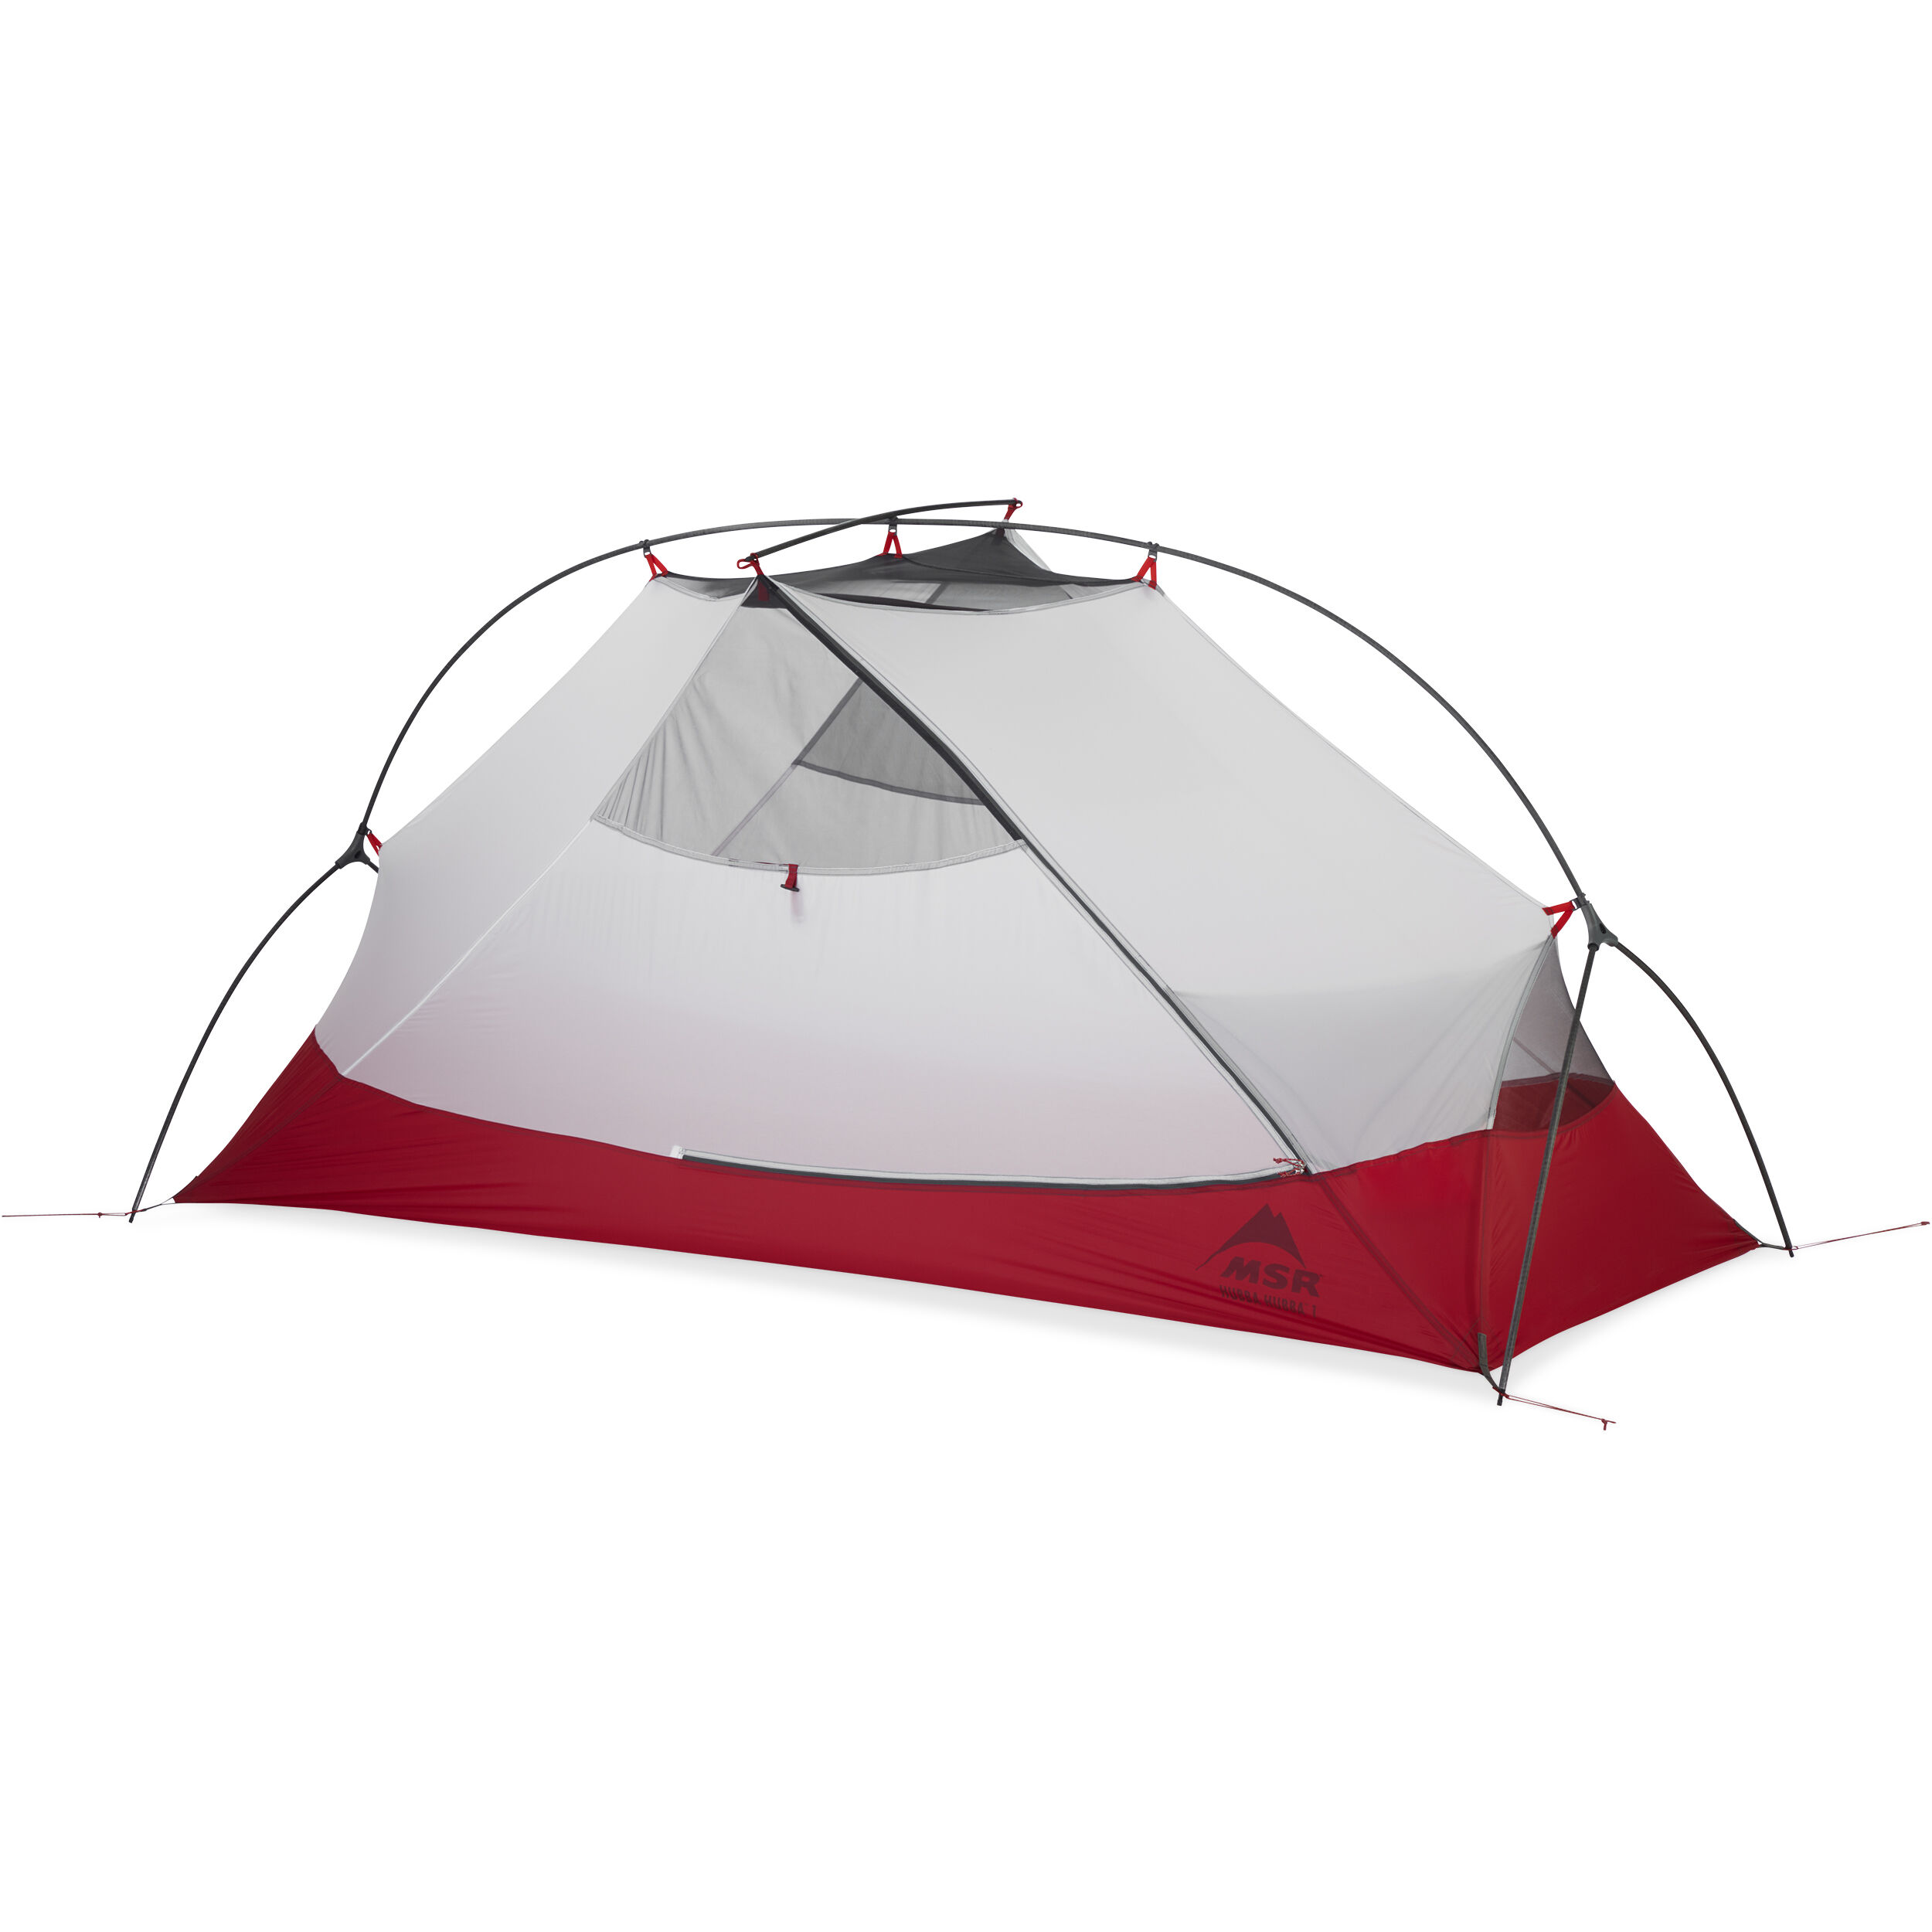 Hubba Hubba™ 1-Person Backpacking Tent